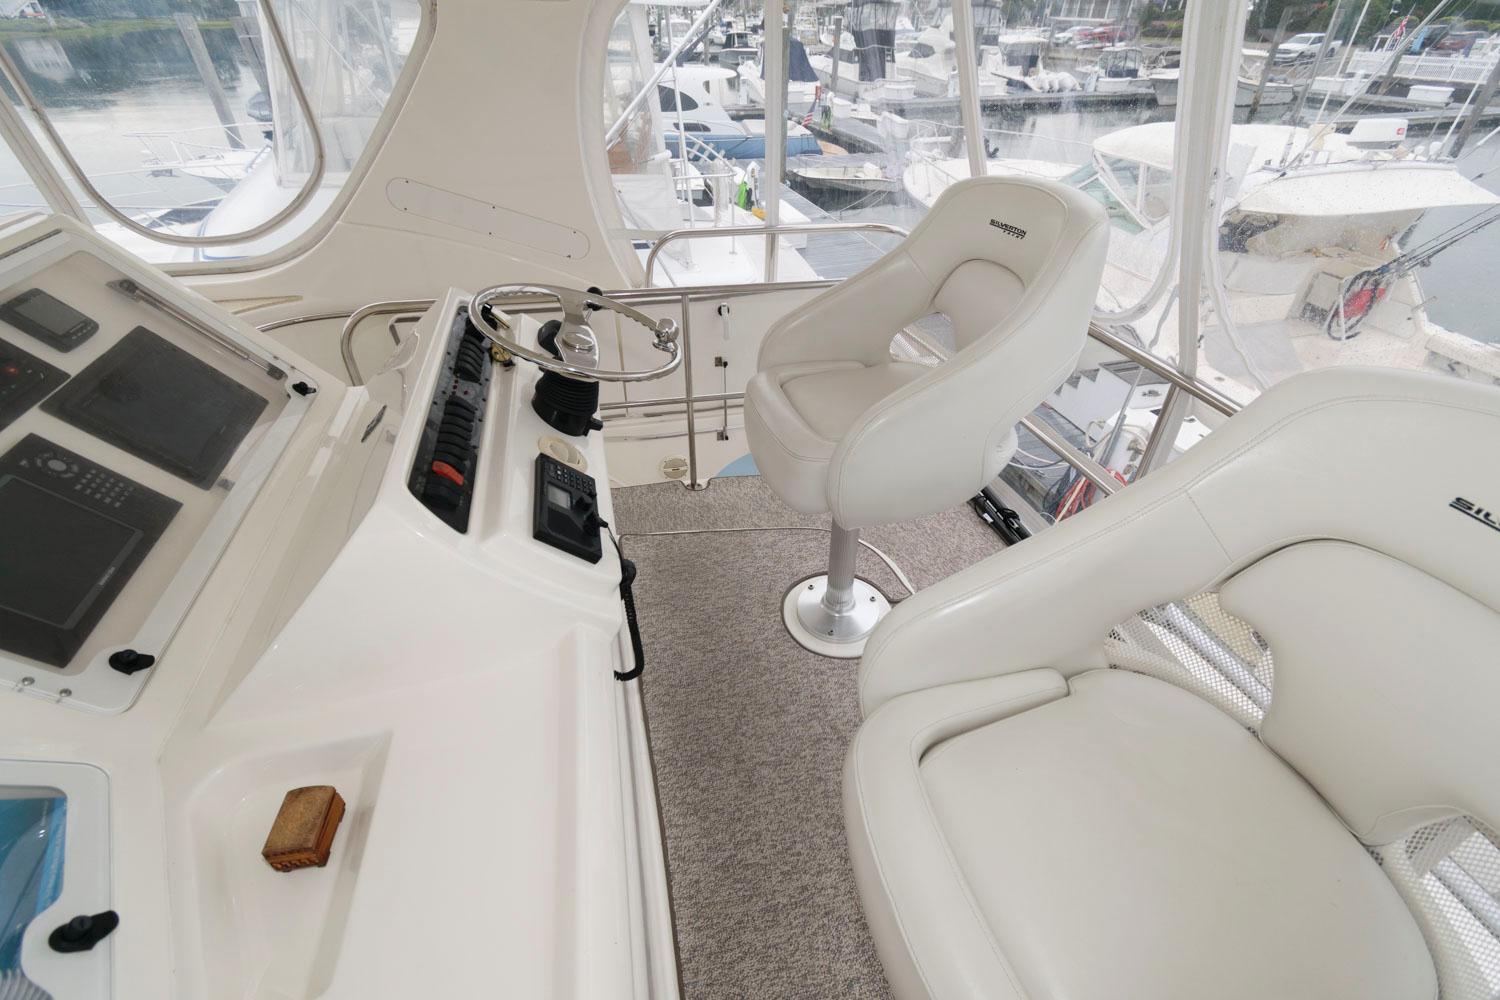 M 7162 RD Knot 10 Yacht Sales